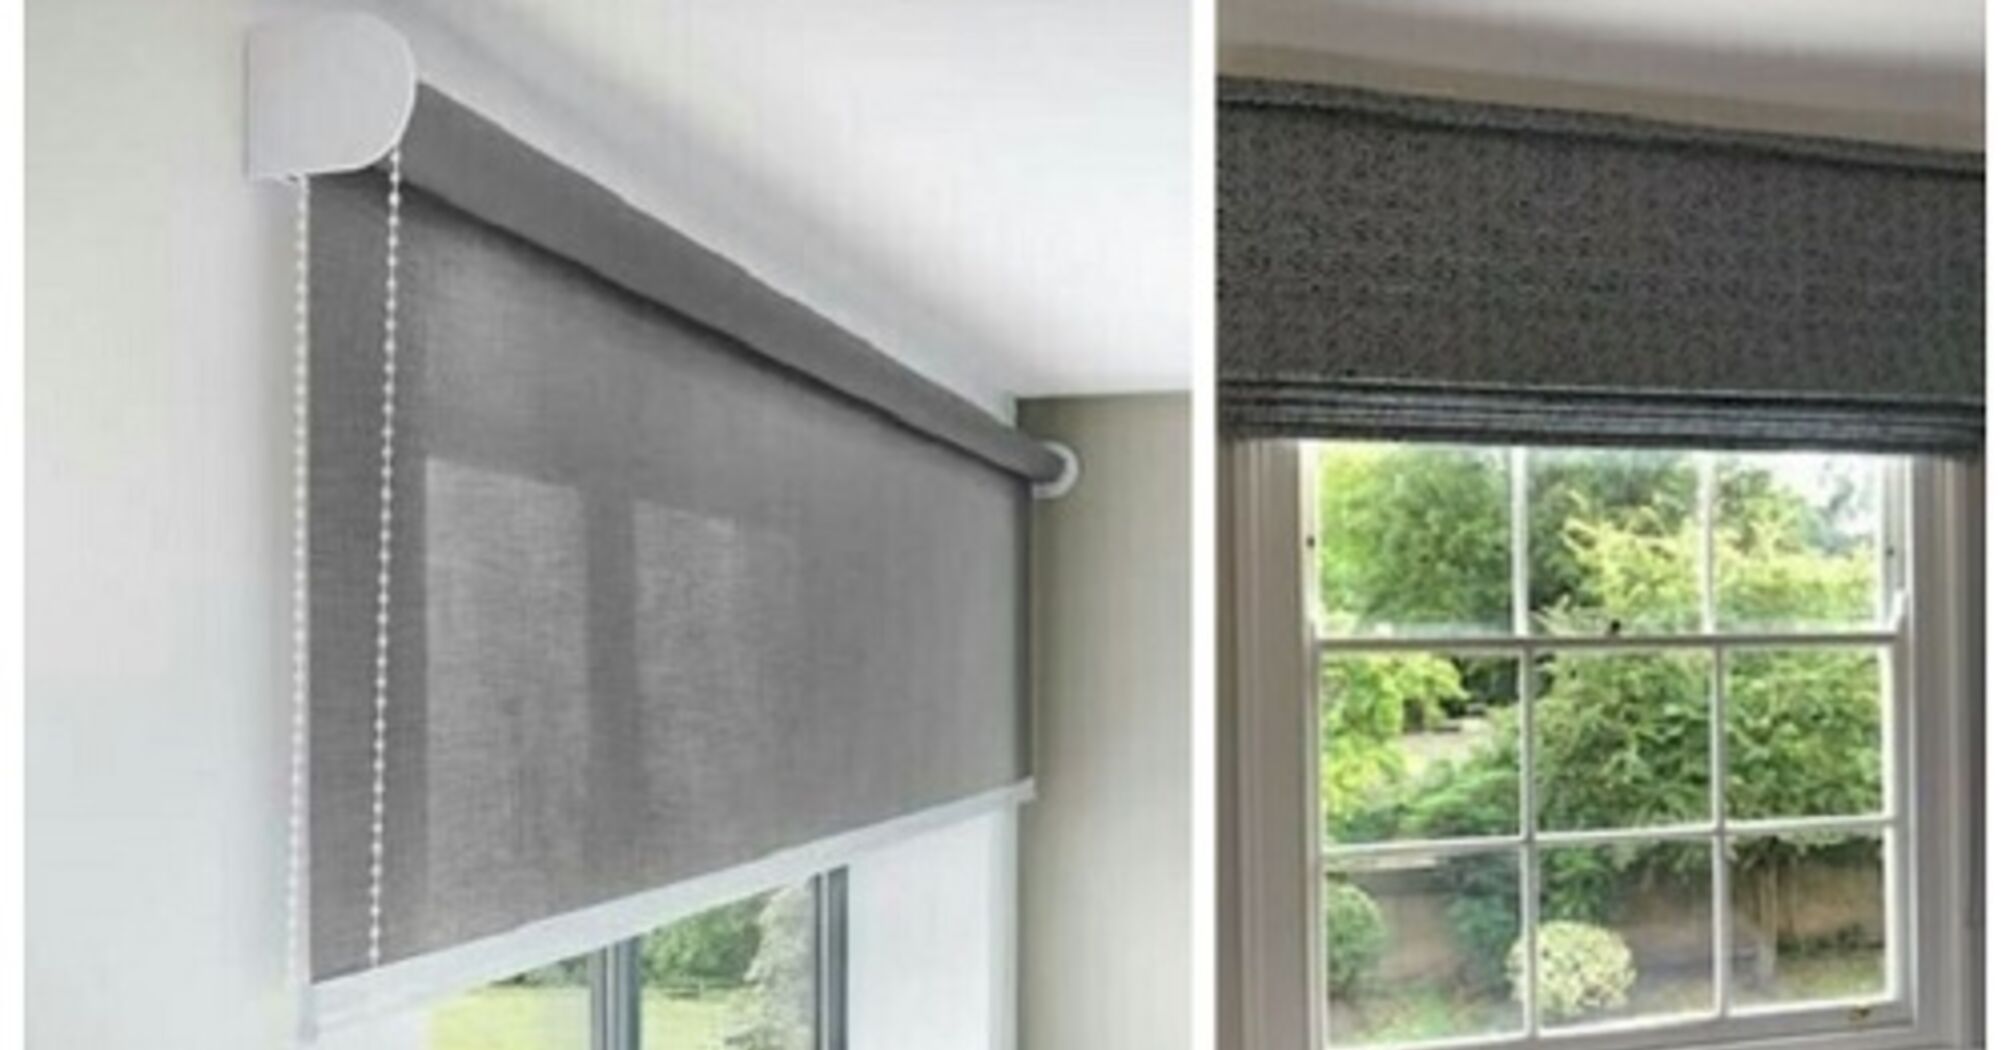 Comparing blinds and roller blinds